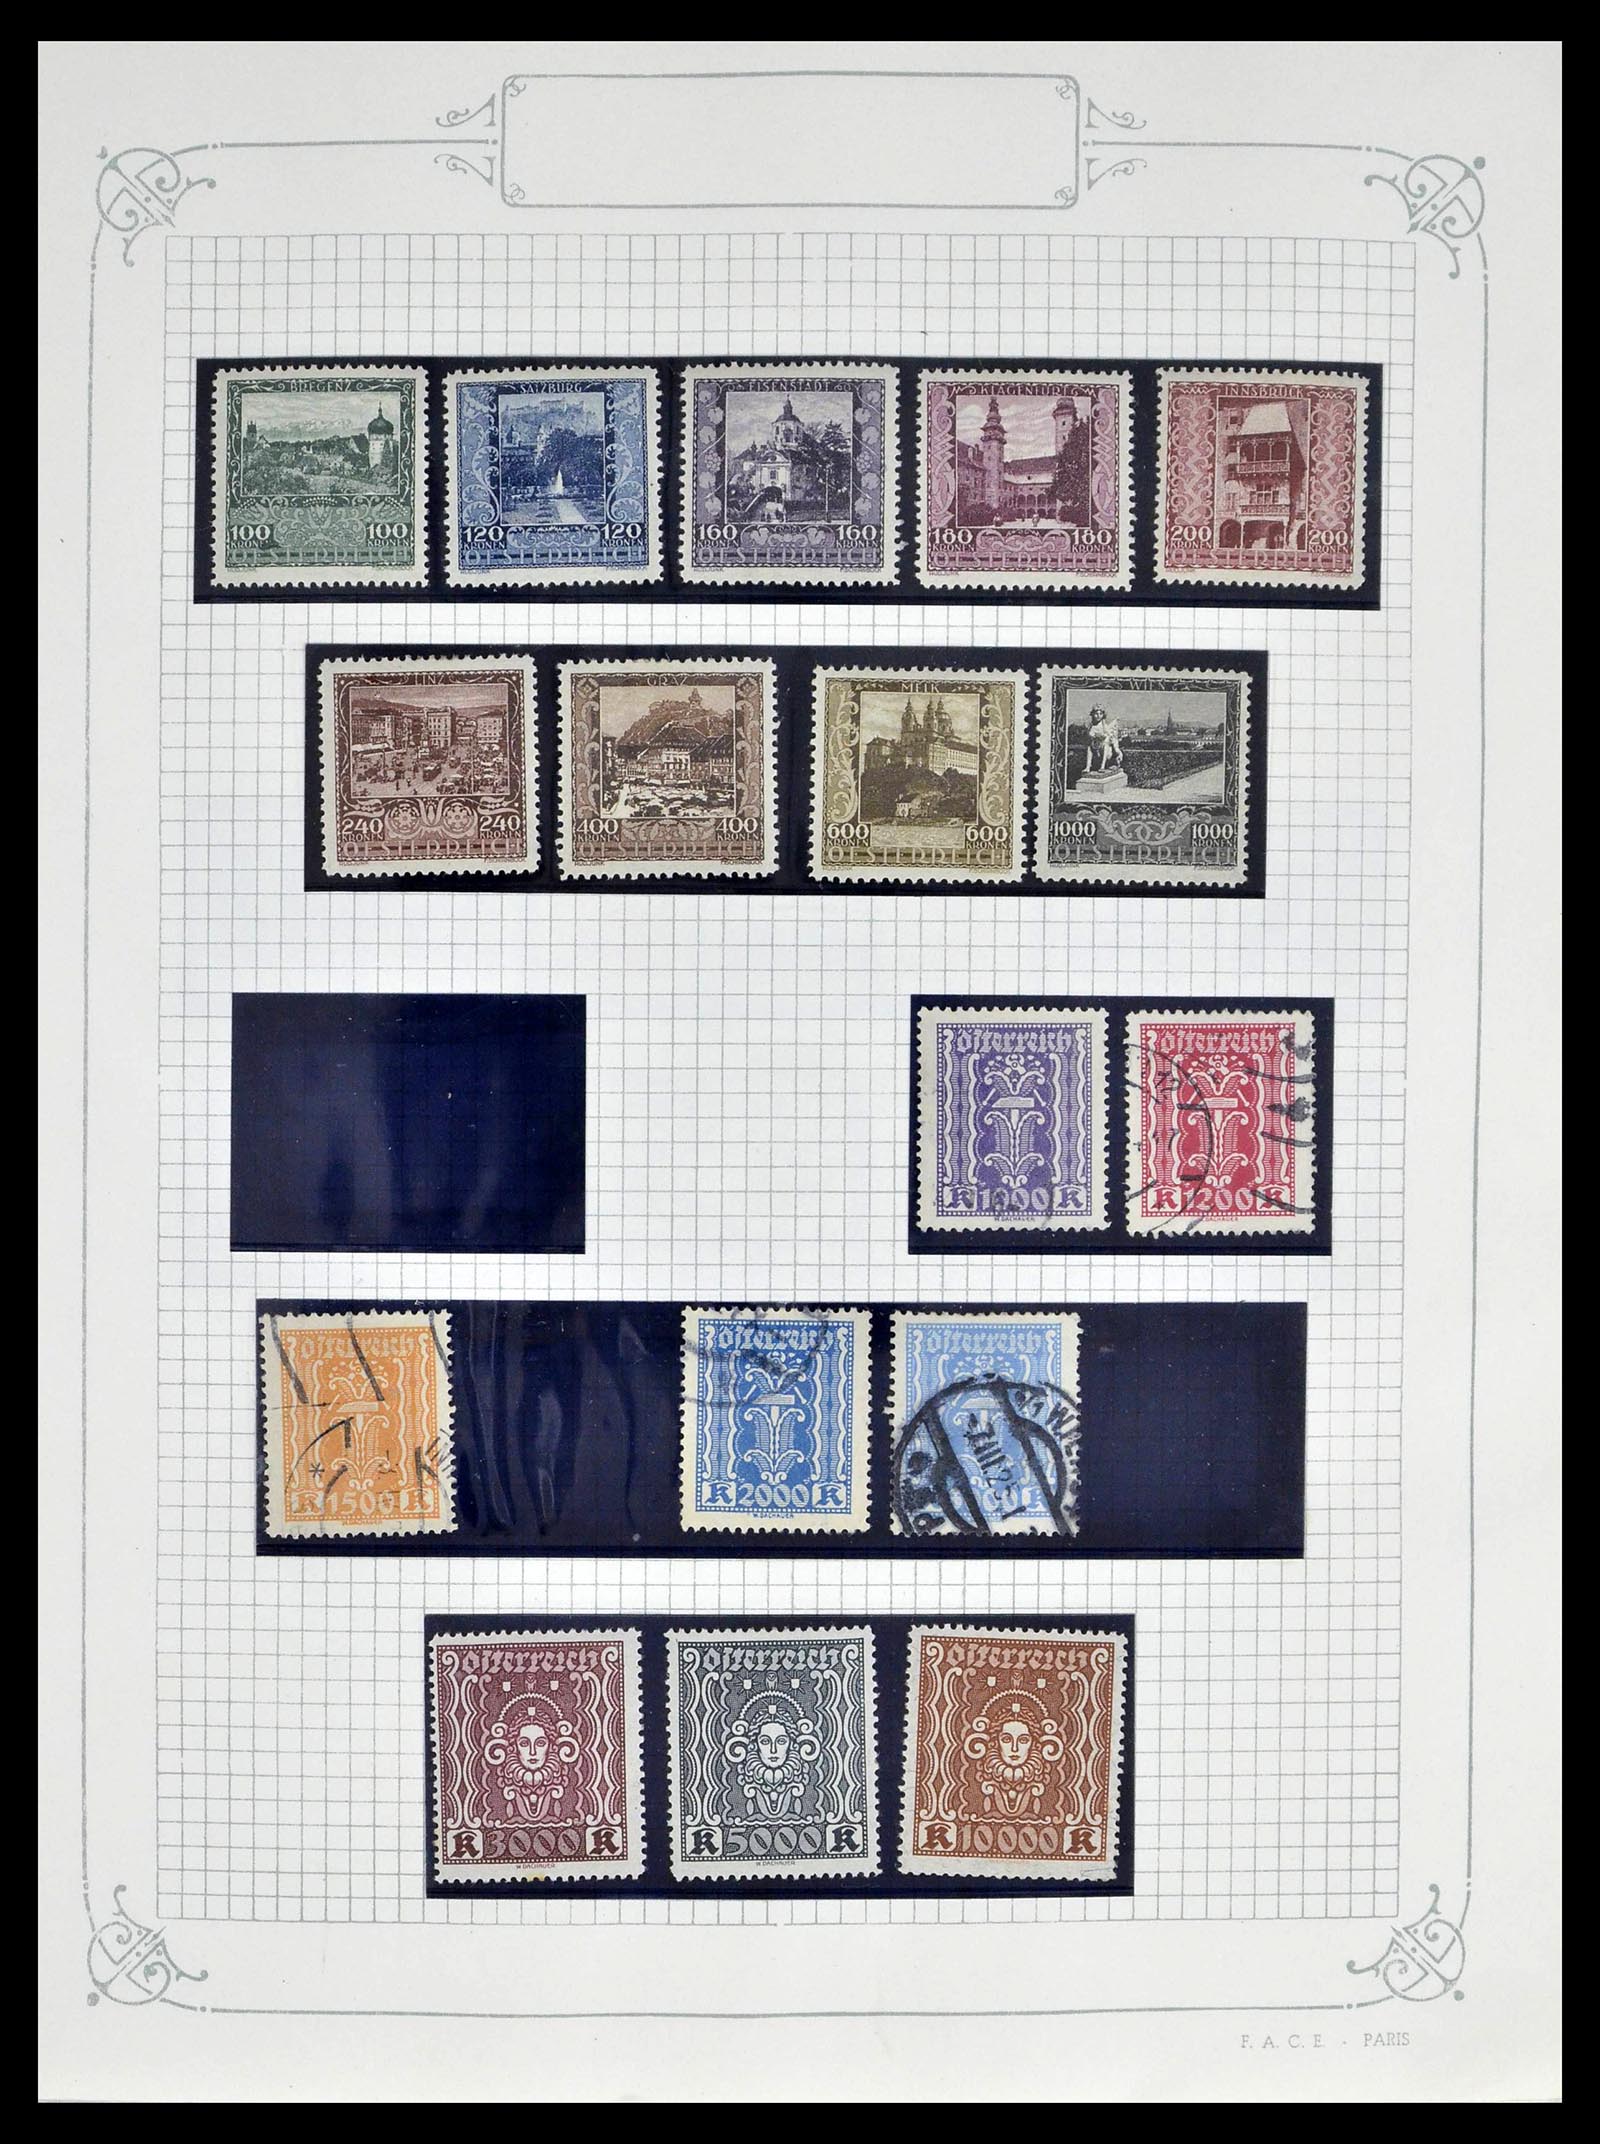 39276 0022 - Stamp collection 39276 Austria and territories 1850-1979.